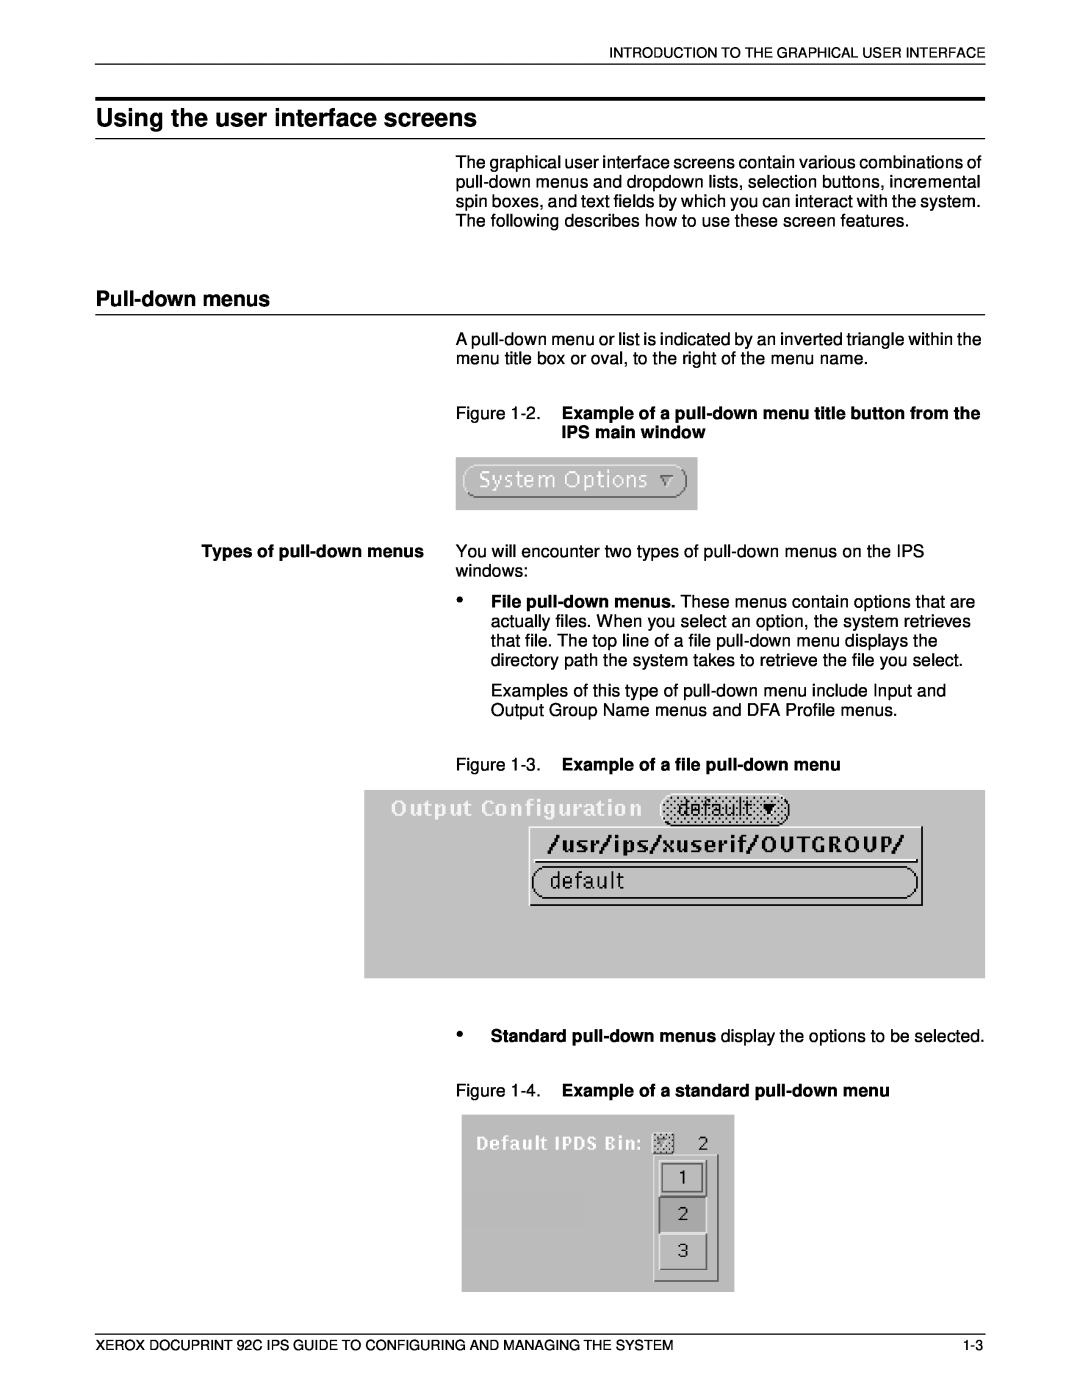 Xerox 92C IPS Using the user interface screens, Pull-down menus, 2. Example of a pull-down menu title button from the 